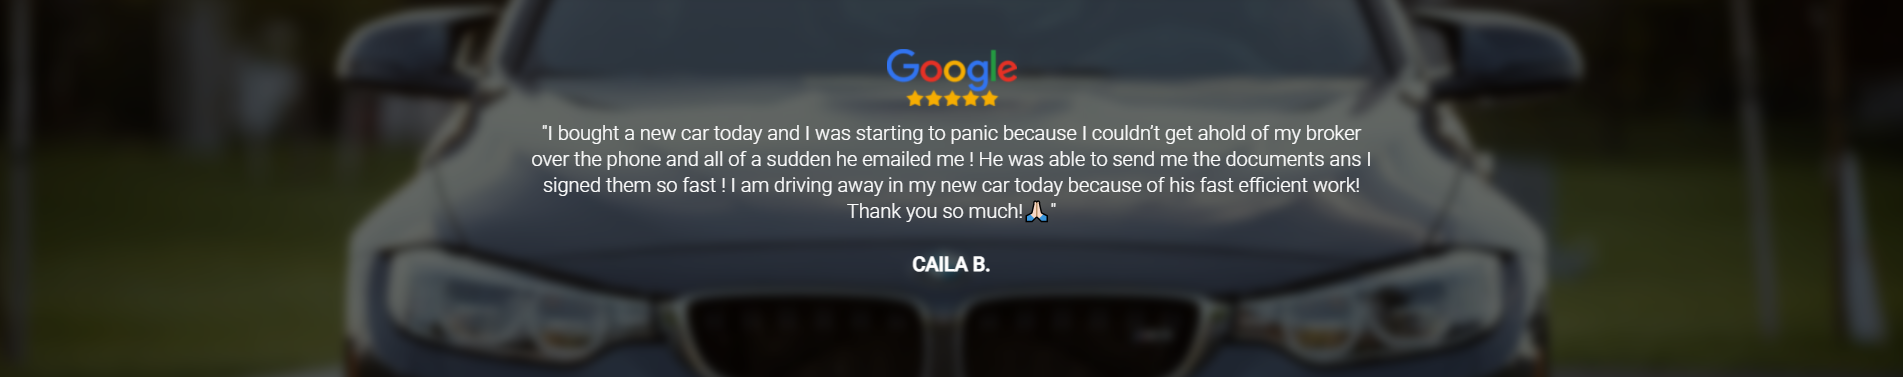 Testimonial from Caila B, Bought new car and get everything done fast efficiently 